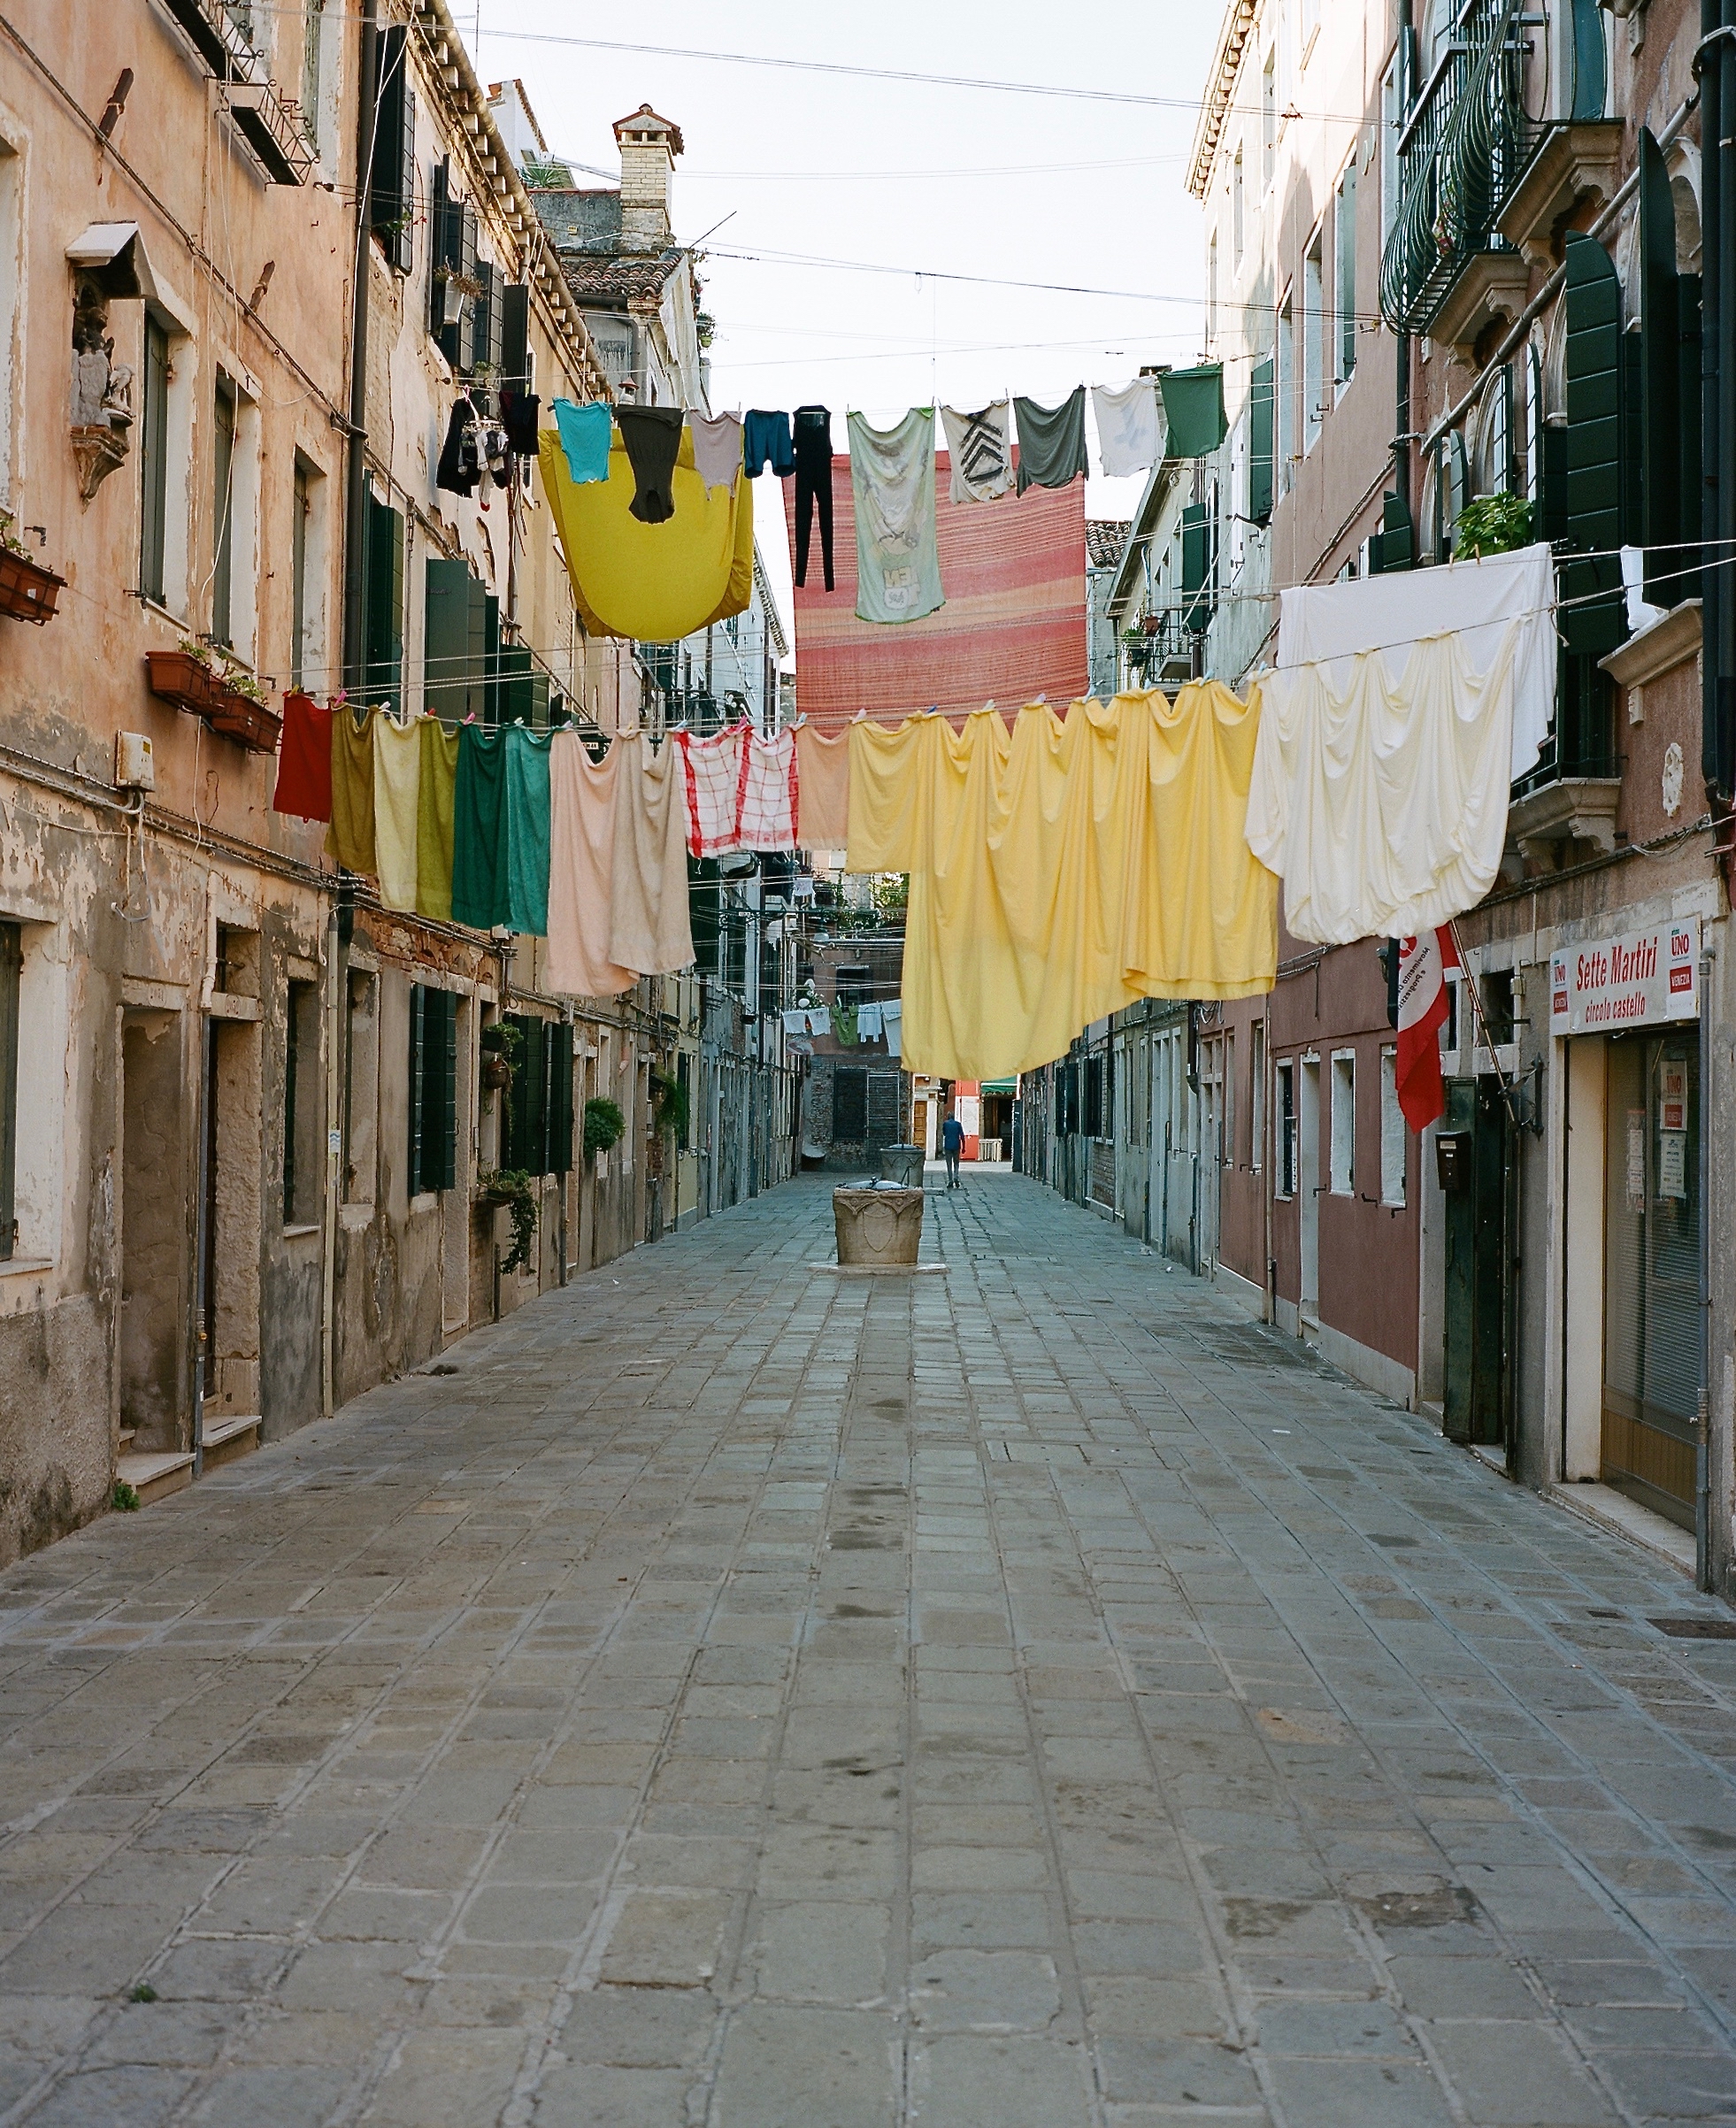 Laneway in Venice. Taken in September 2018, with Mamiya 7ii and 80mm lens, and Kodak Portra 400 120 film